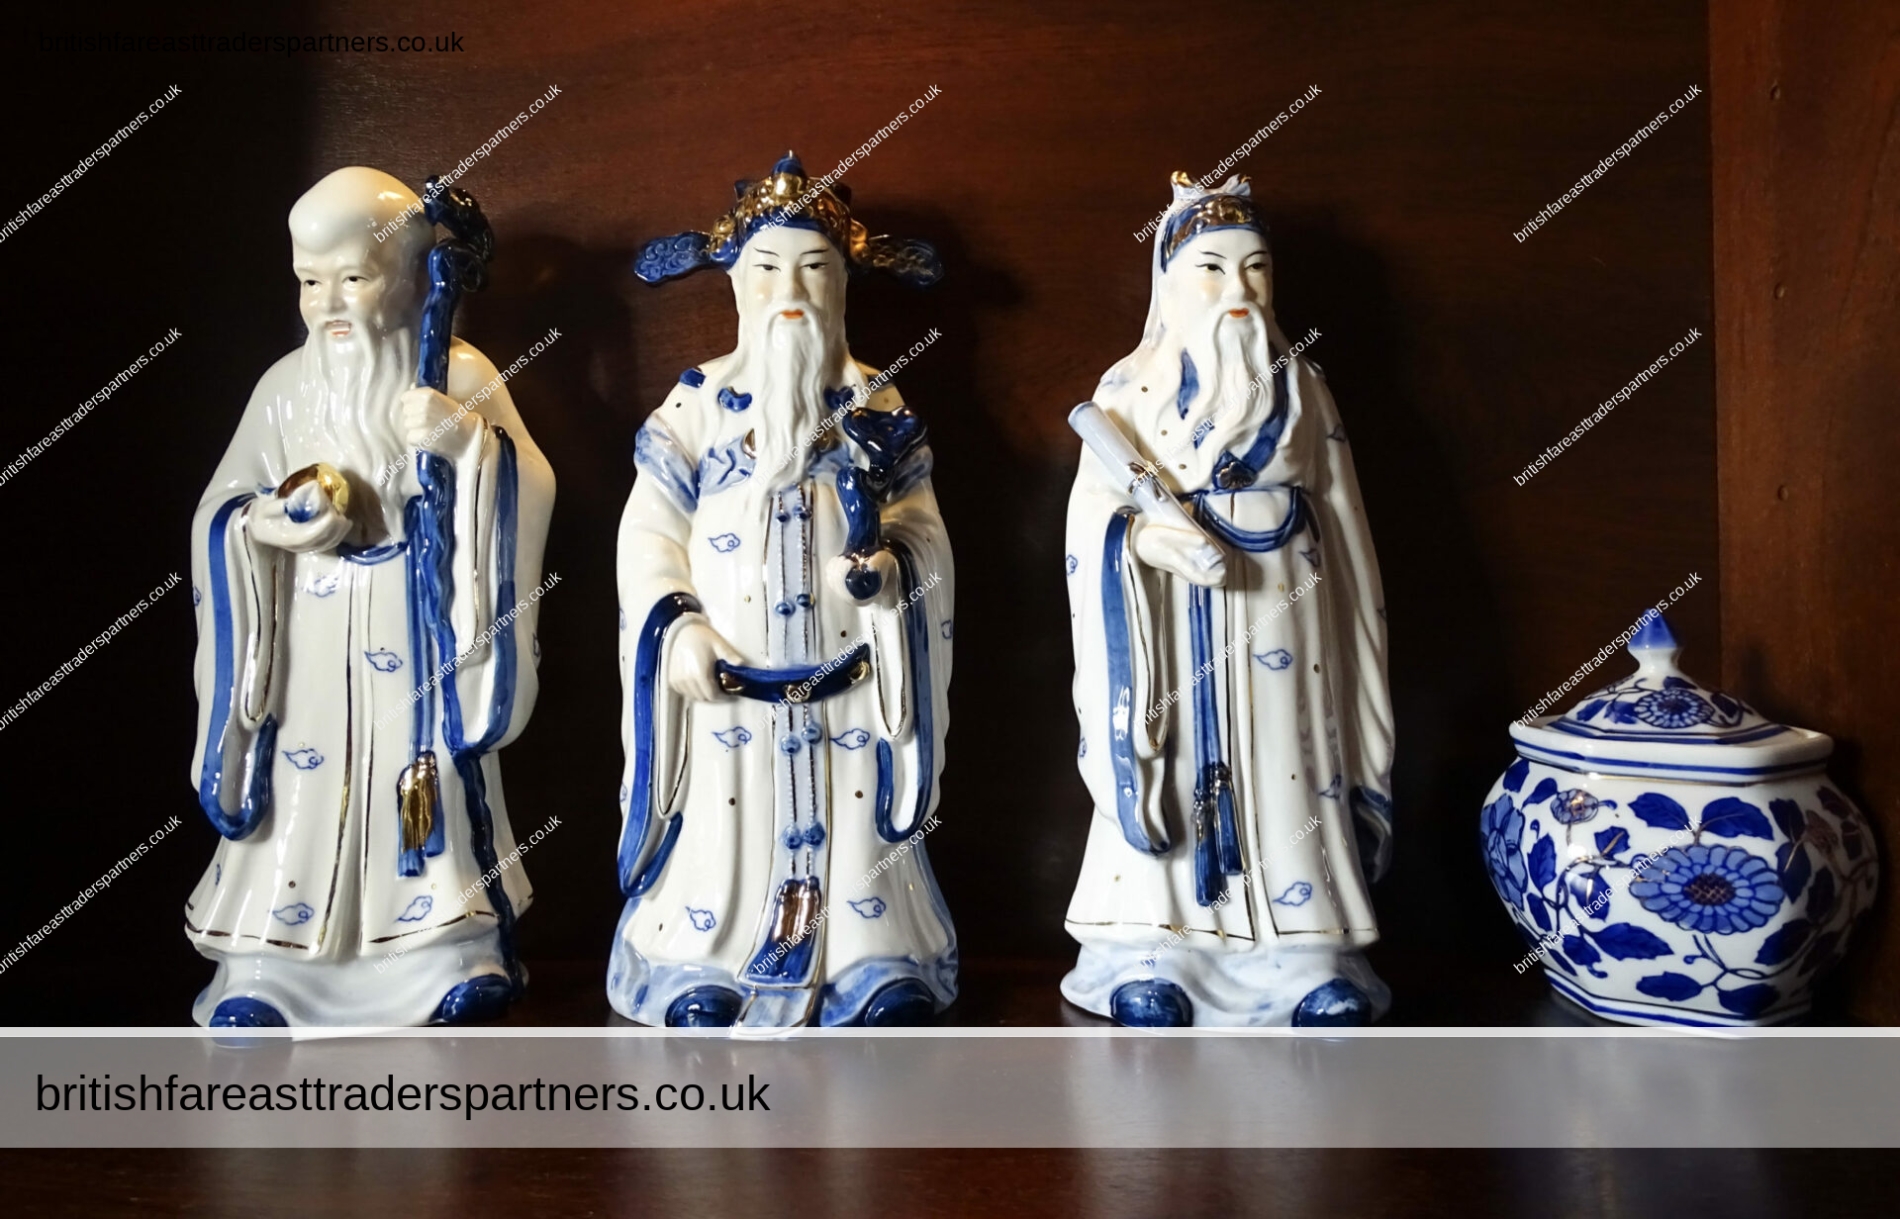 THE SANXING CHINESE GODS OF THREE STARS : SHOU (LONGEVITY) , LU (PROSPERITY) , FU (FORTUNE) THREE BEARDED OLD WISE MEN OF MING DYNASTY REPRESENTING THE THREE ATTRIBUTES OF A GOOD LIFE. BLUE, WHITE, GOLD PORCELAIN RAMINDO COLLECTION